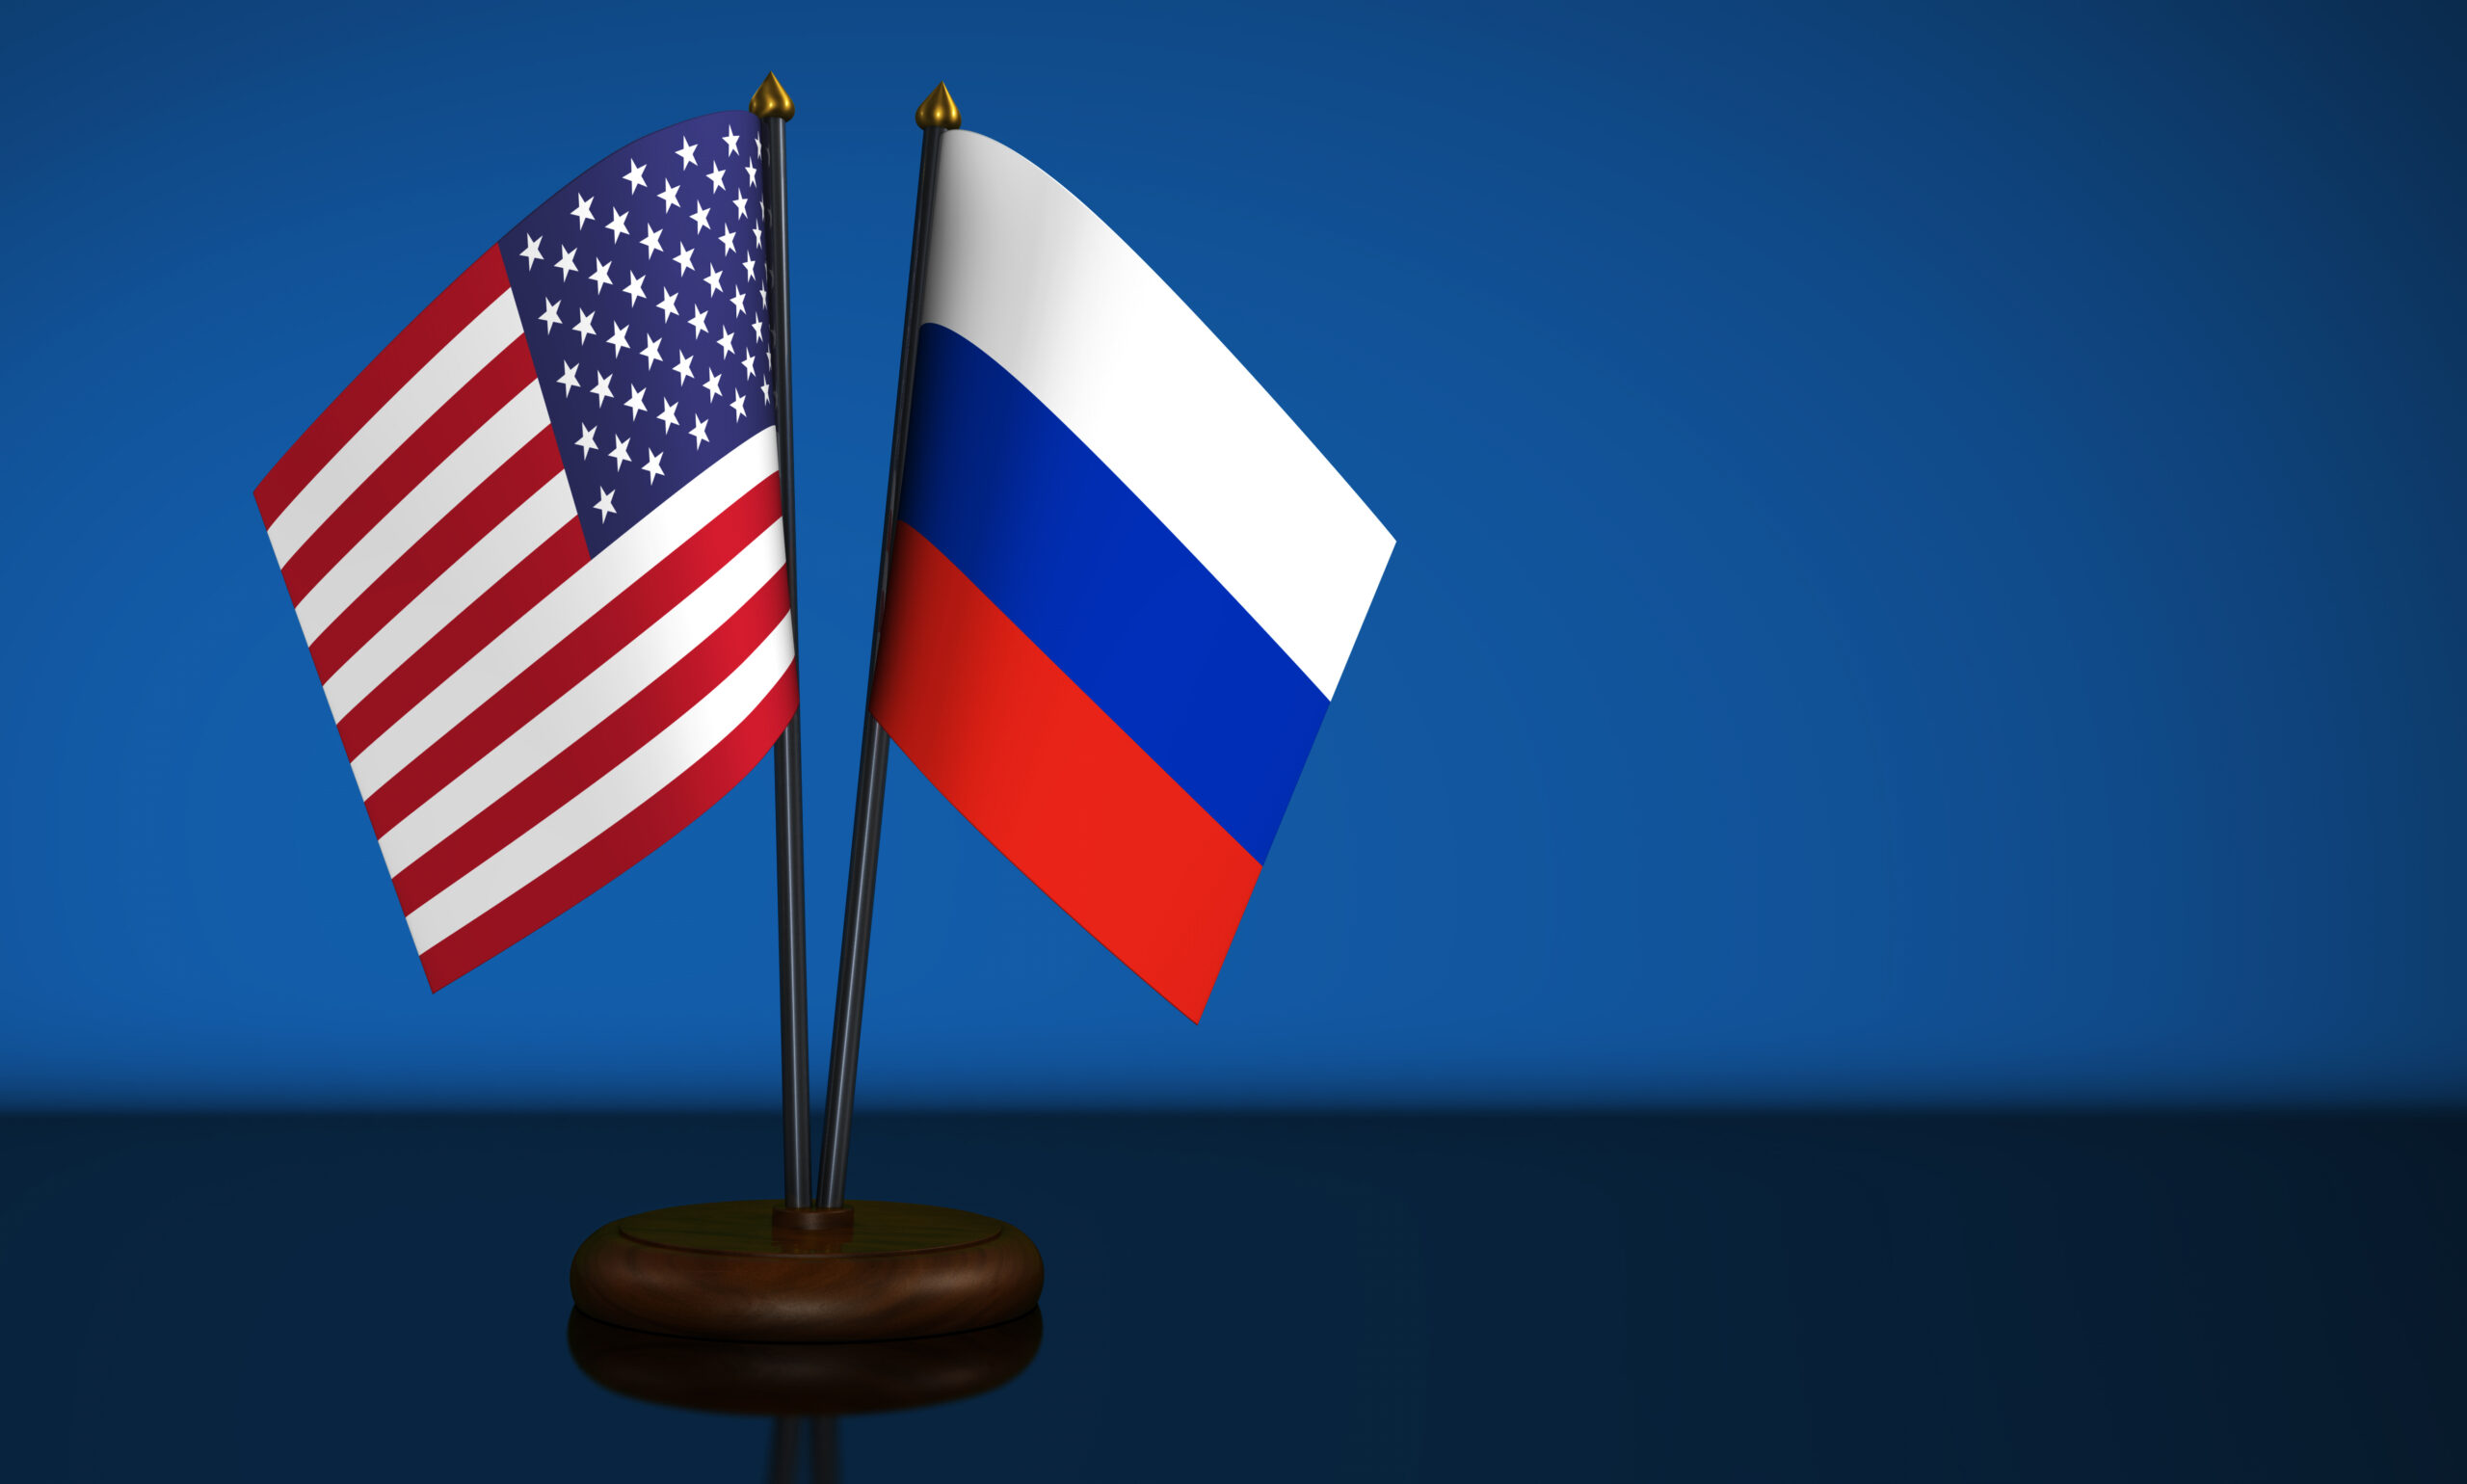 United States of America flag and Russian Federation desk flags 3D illustration.